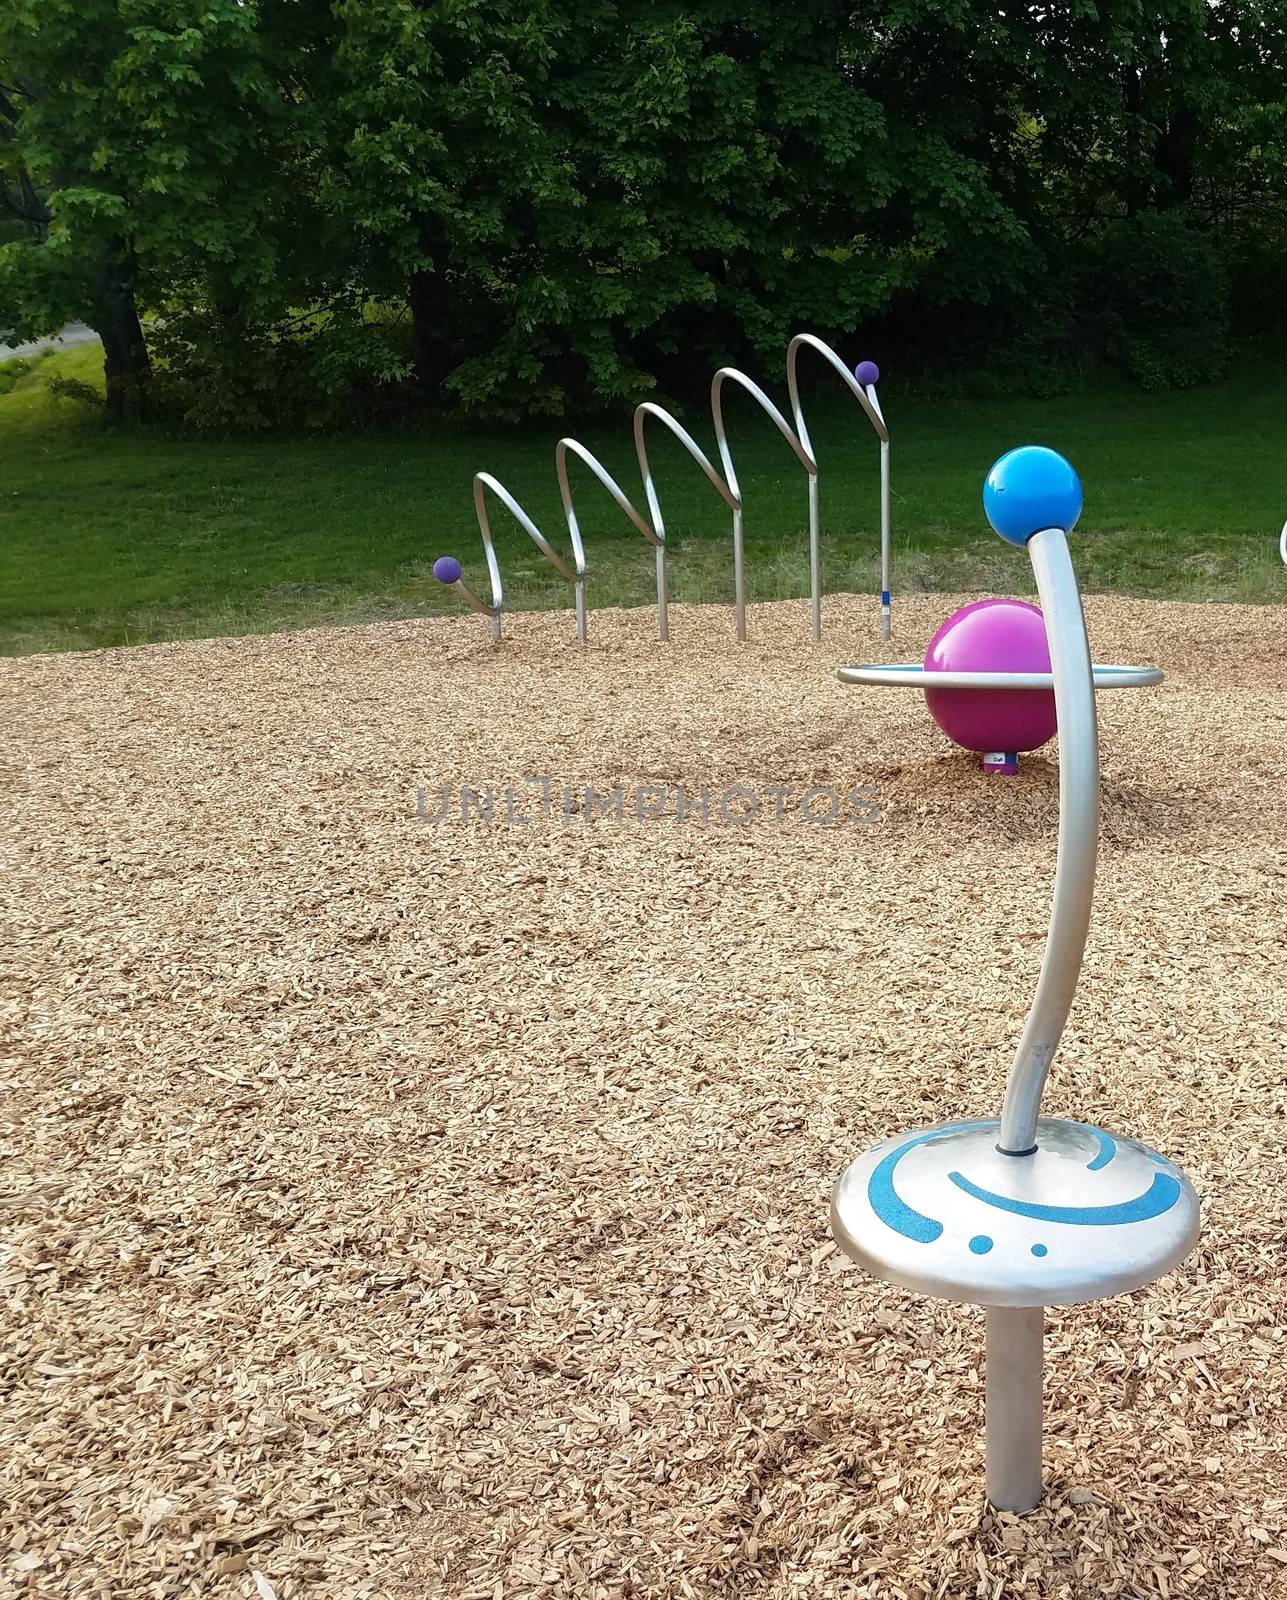 play structure at playground with metal spinner and wood chips